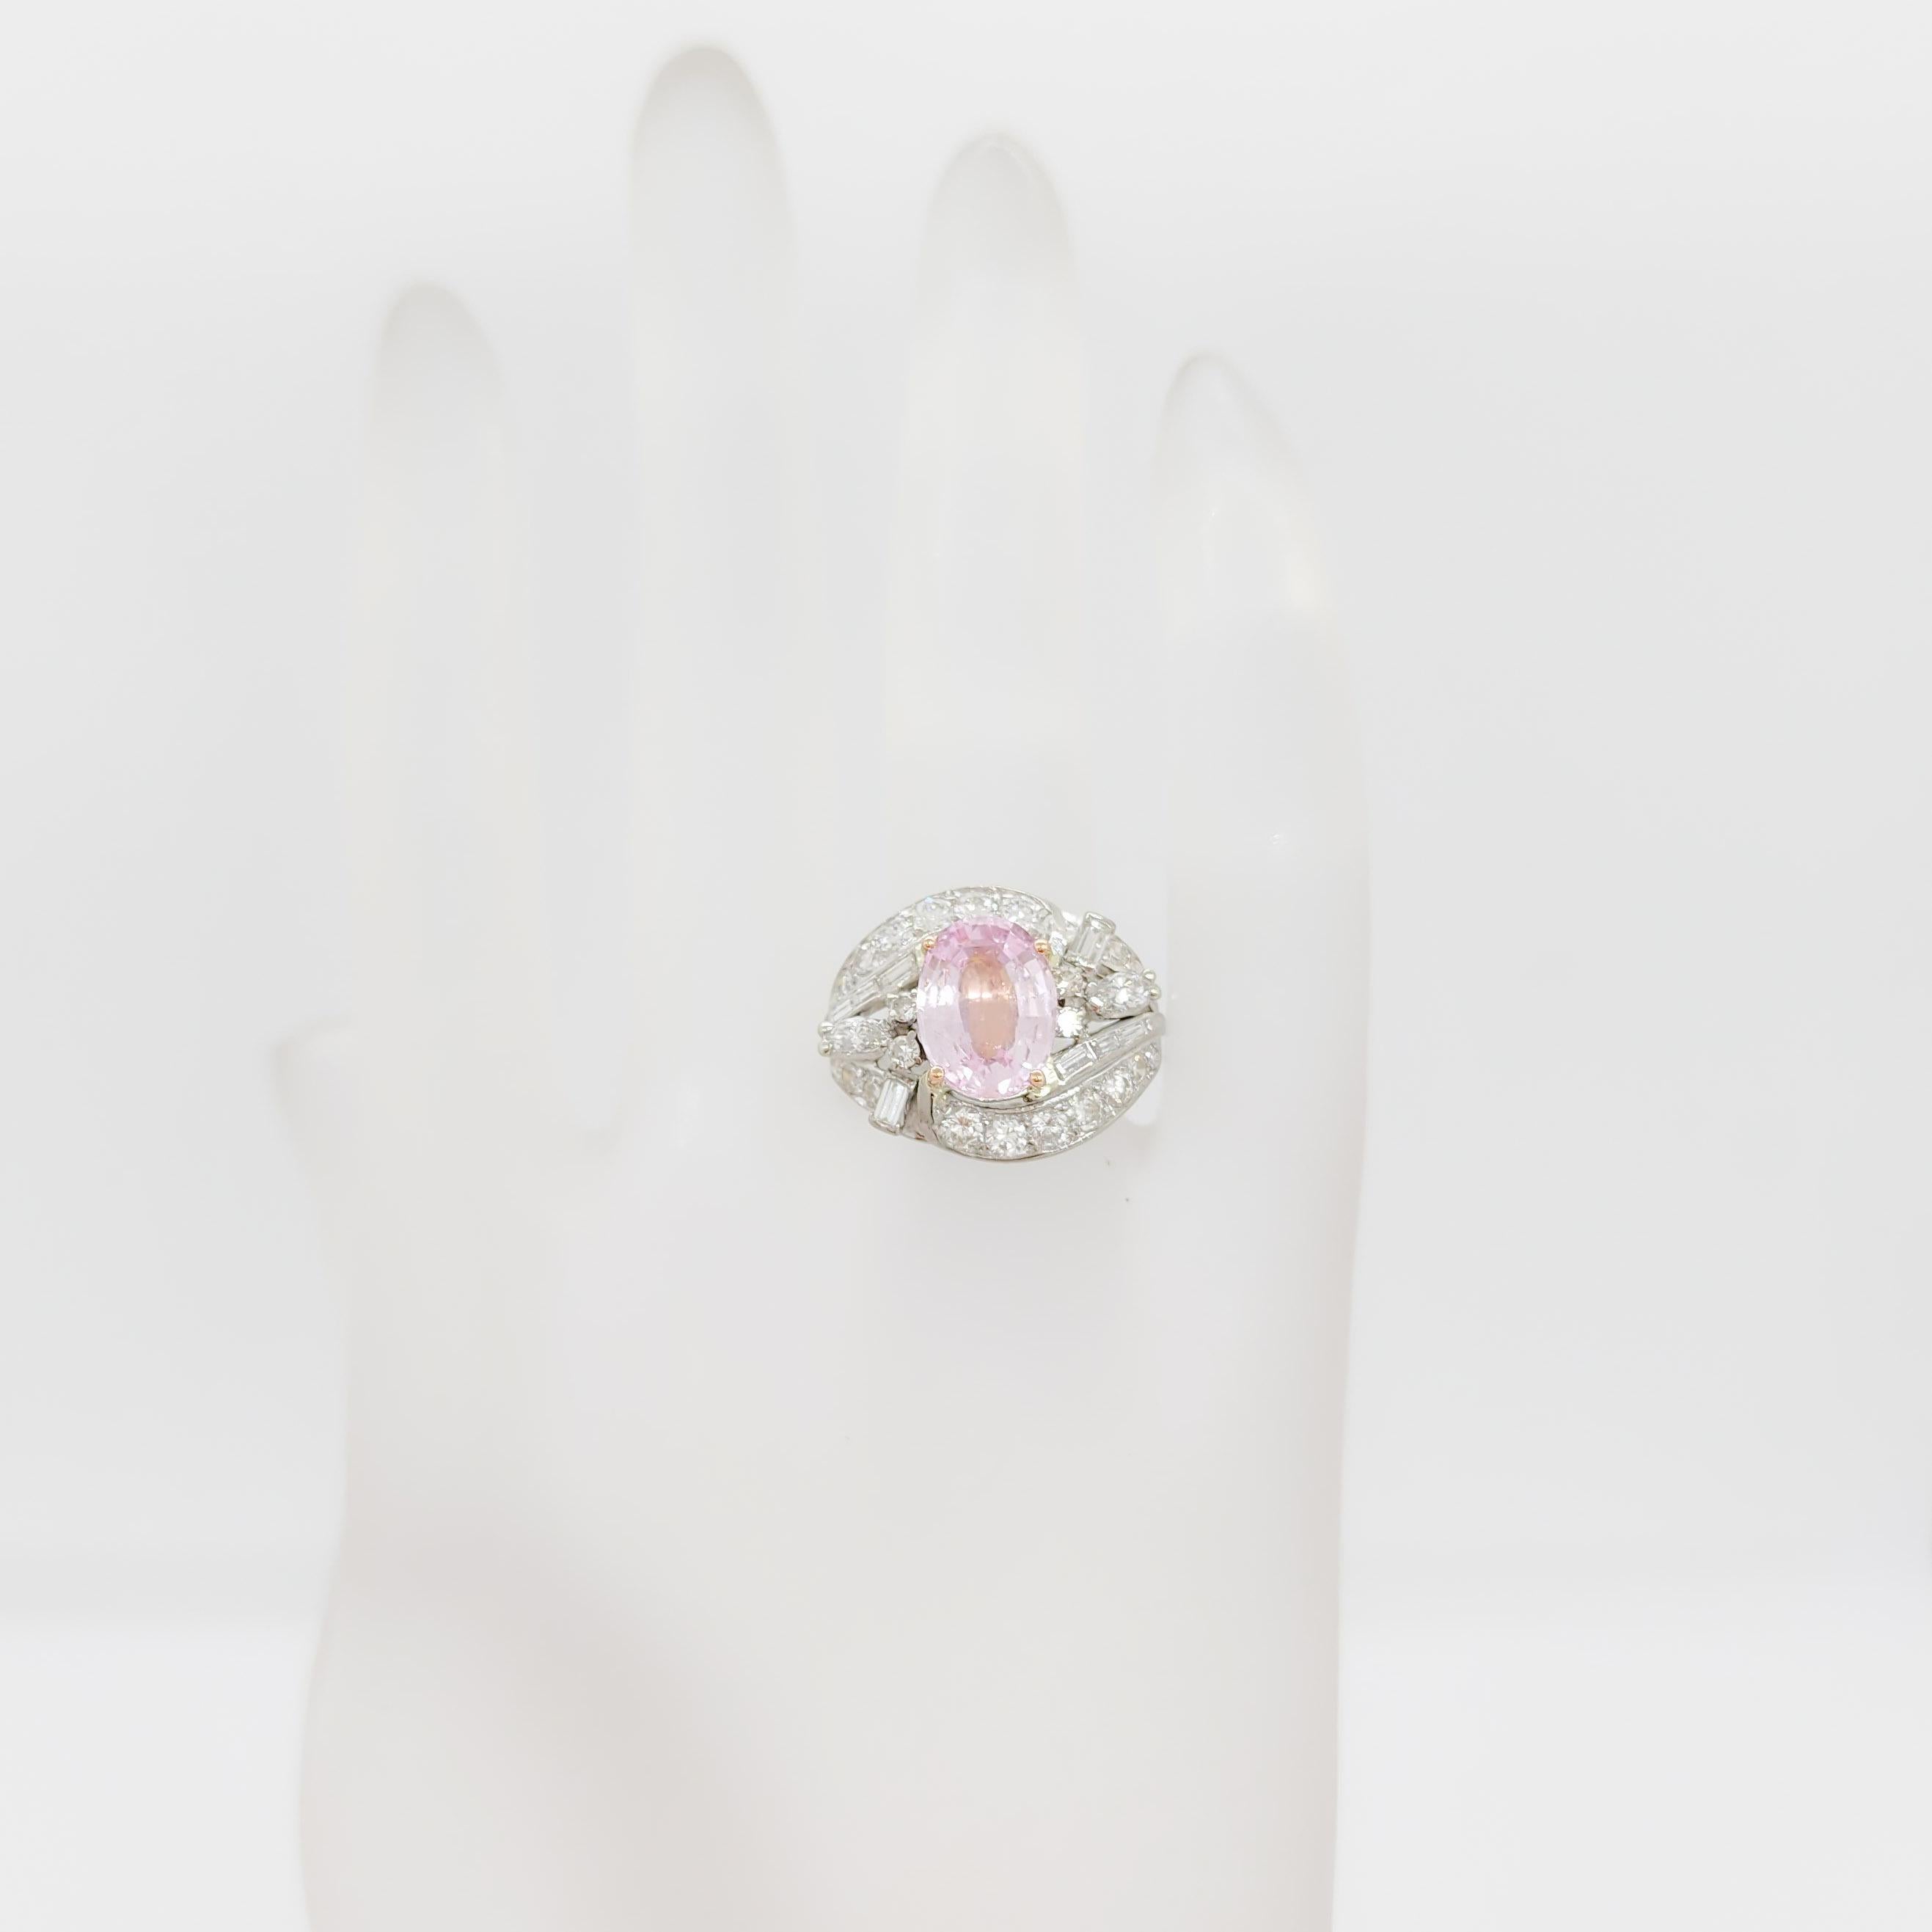 padparadscha sapphires ring